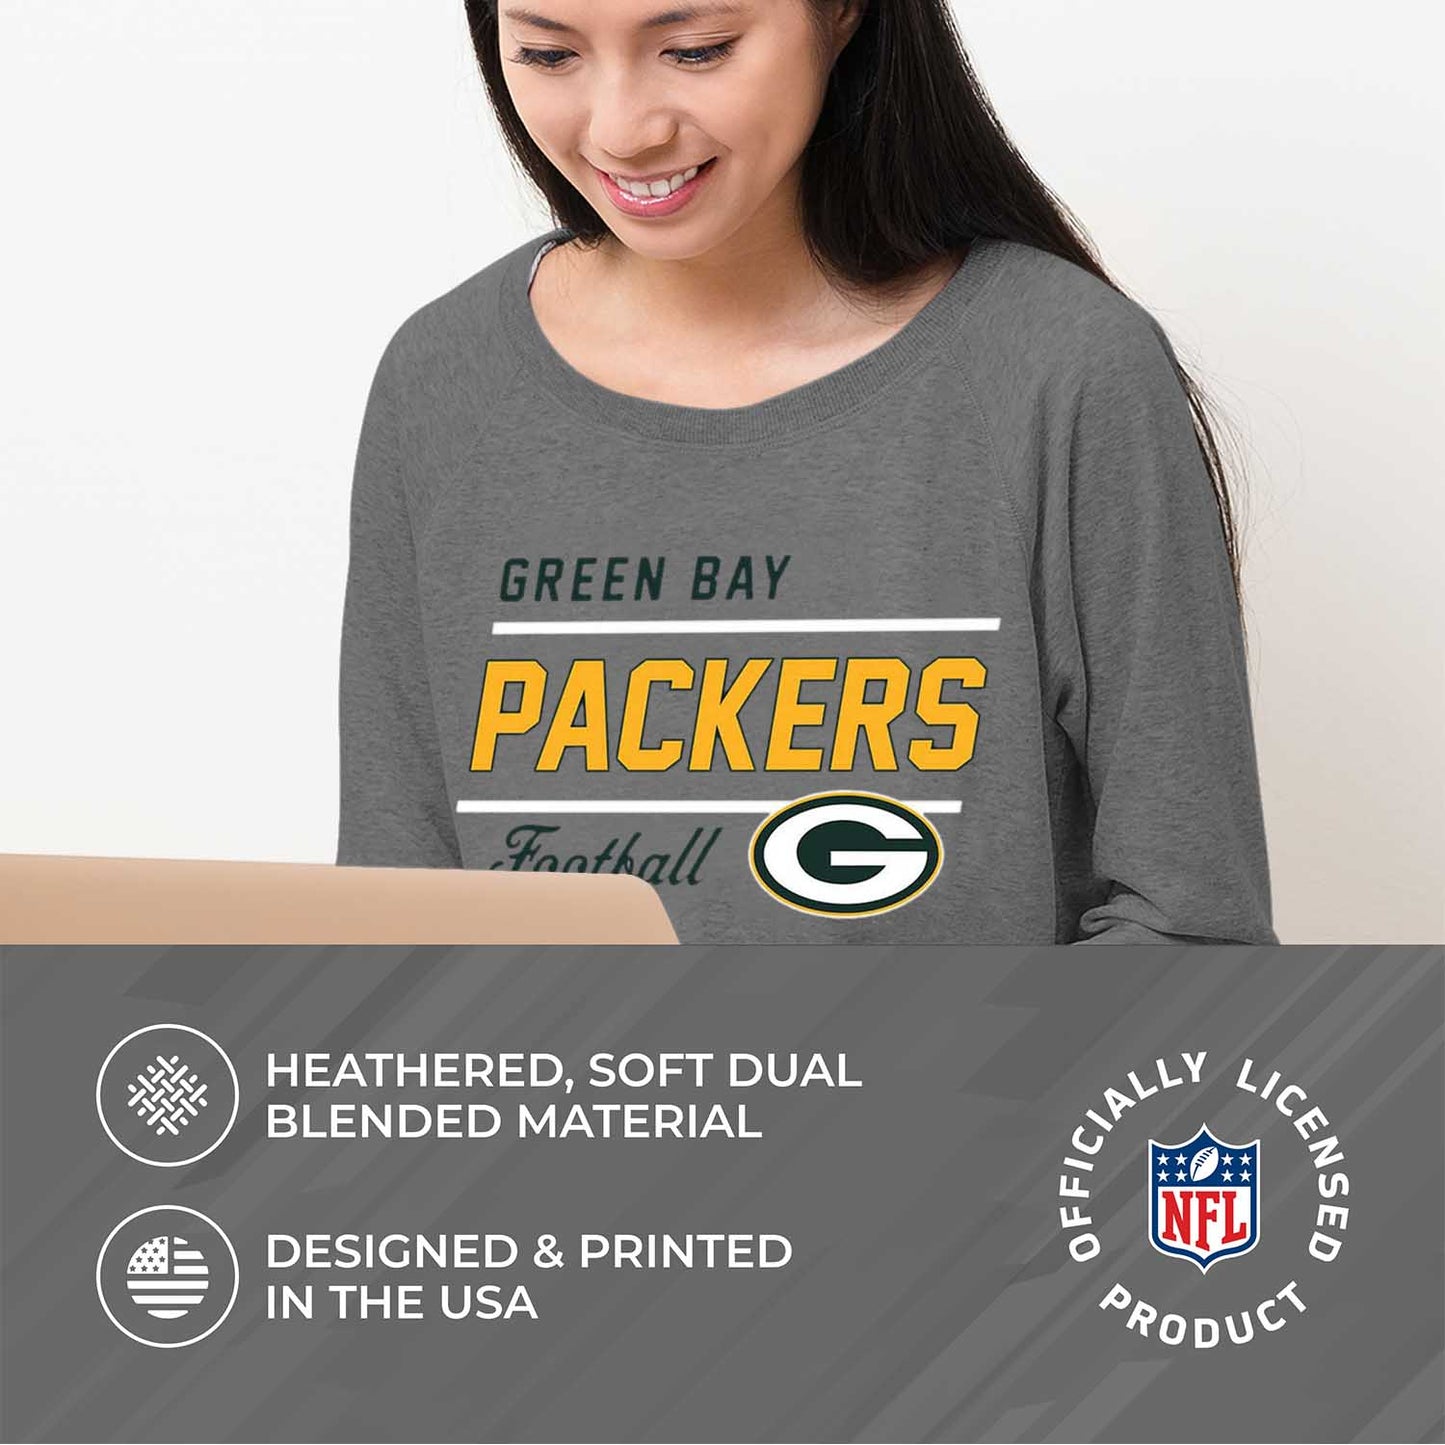 Green Bay Packers Green Bay Packers NFL Womens Crew Neck Light Weight